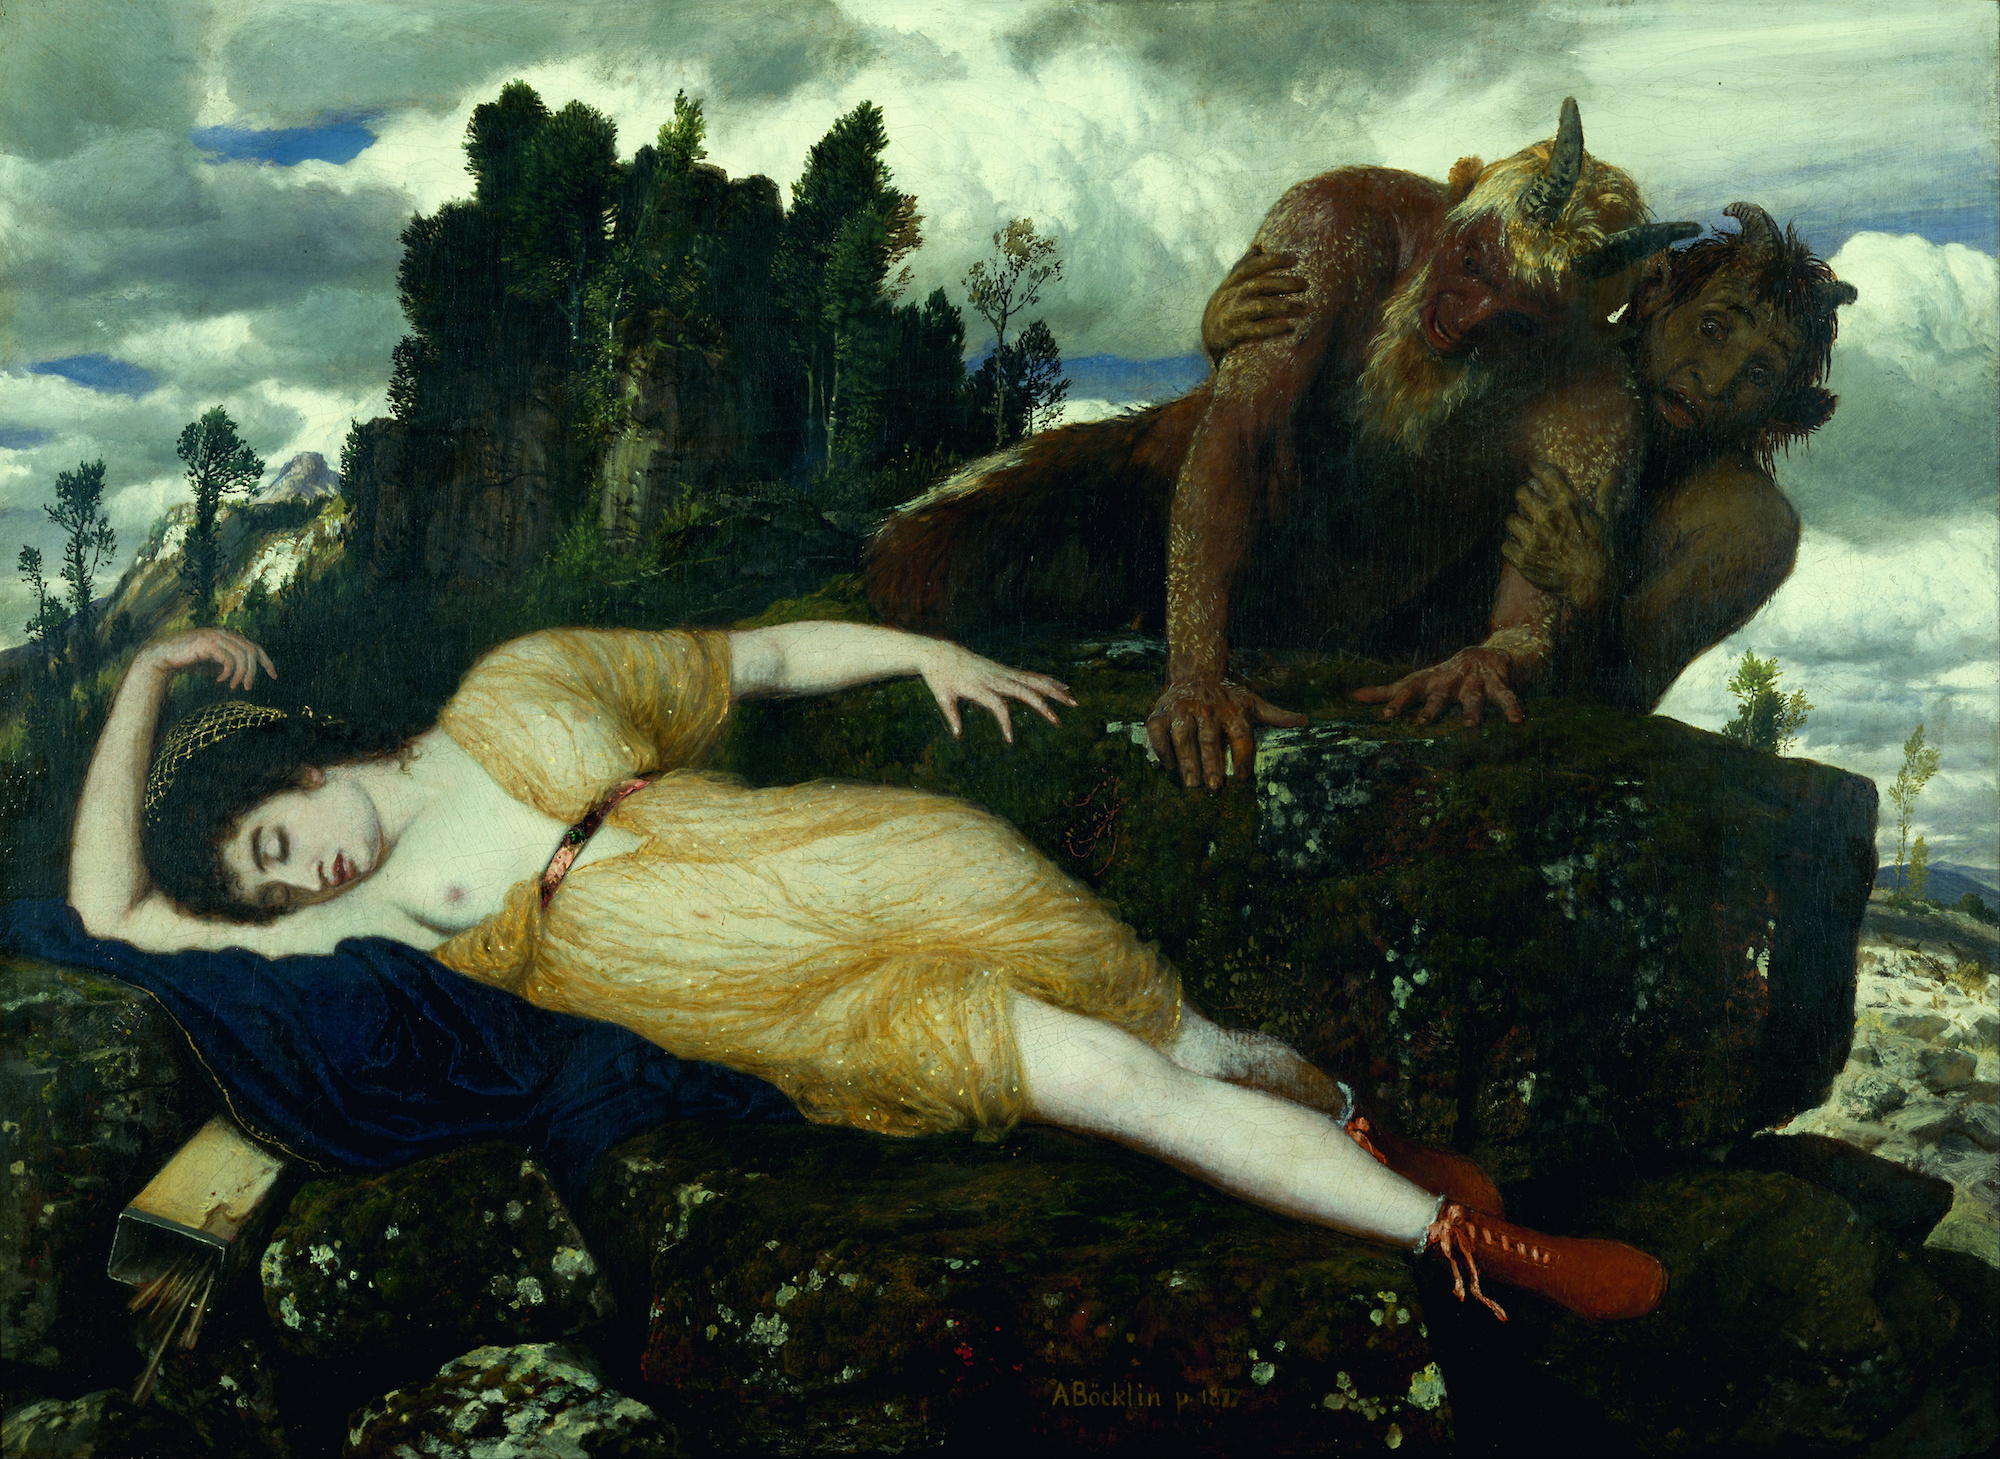 Sleeping Diana Watched by Two Fauns by Arnold Böcklin - 1877 - 105 x 77.4 cm Museum Kunstpalast